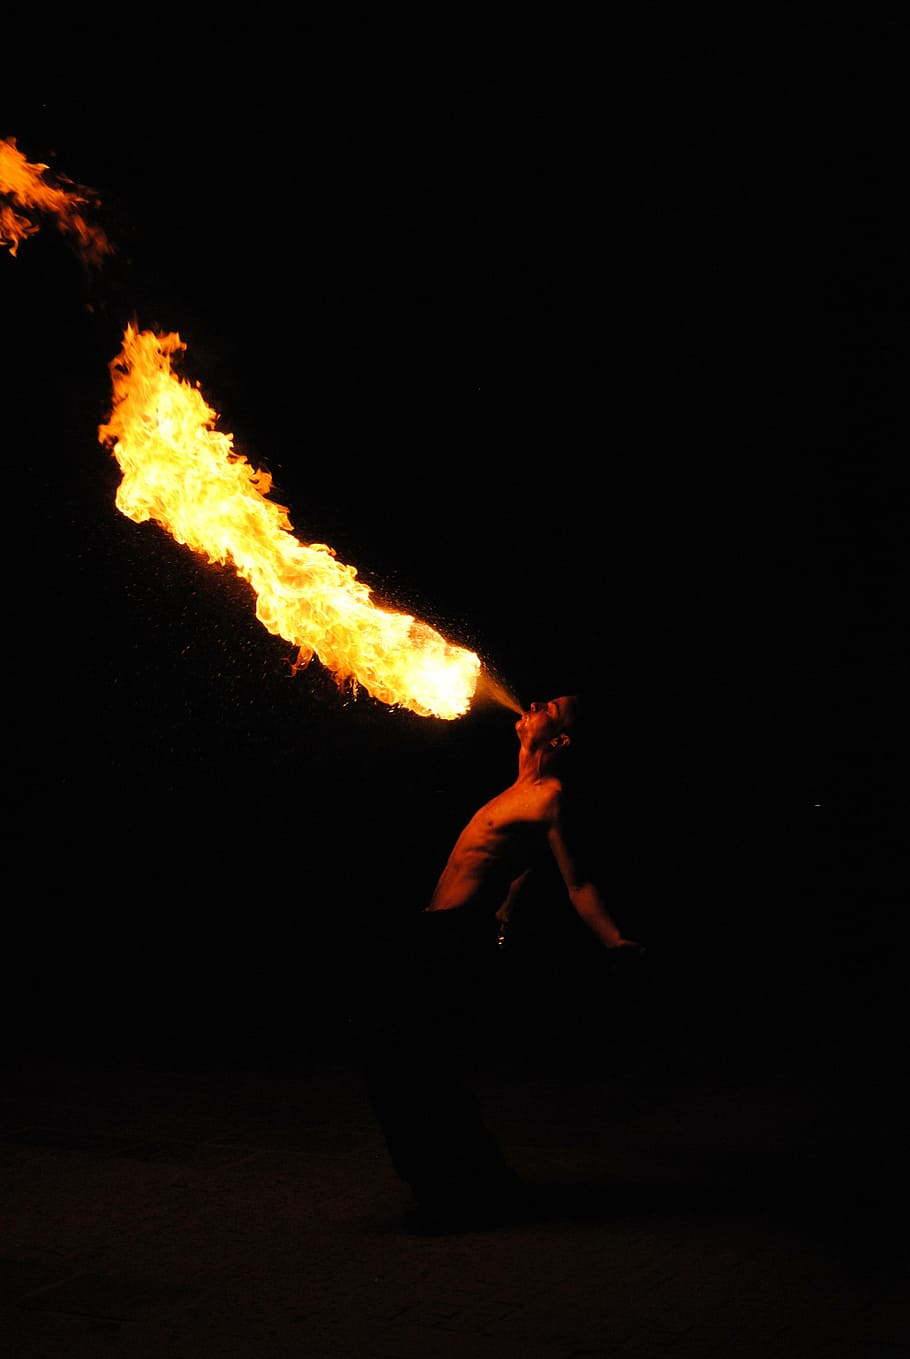 artist, fire eaters, show, fire, burning, flame, fire - natural phenomenon, one person, heat - temperature, night